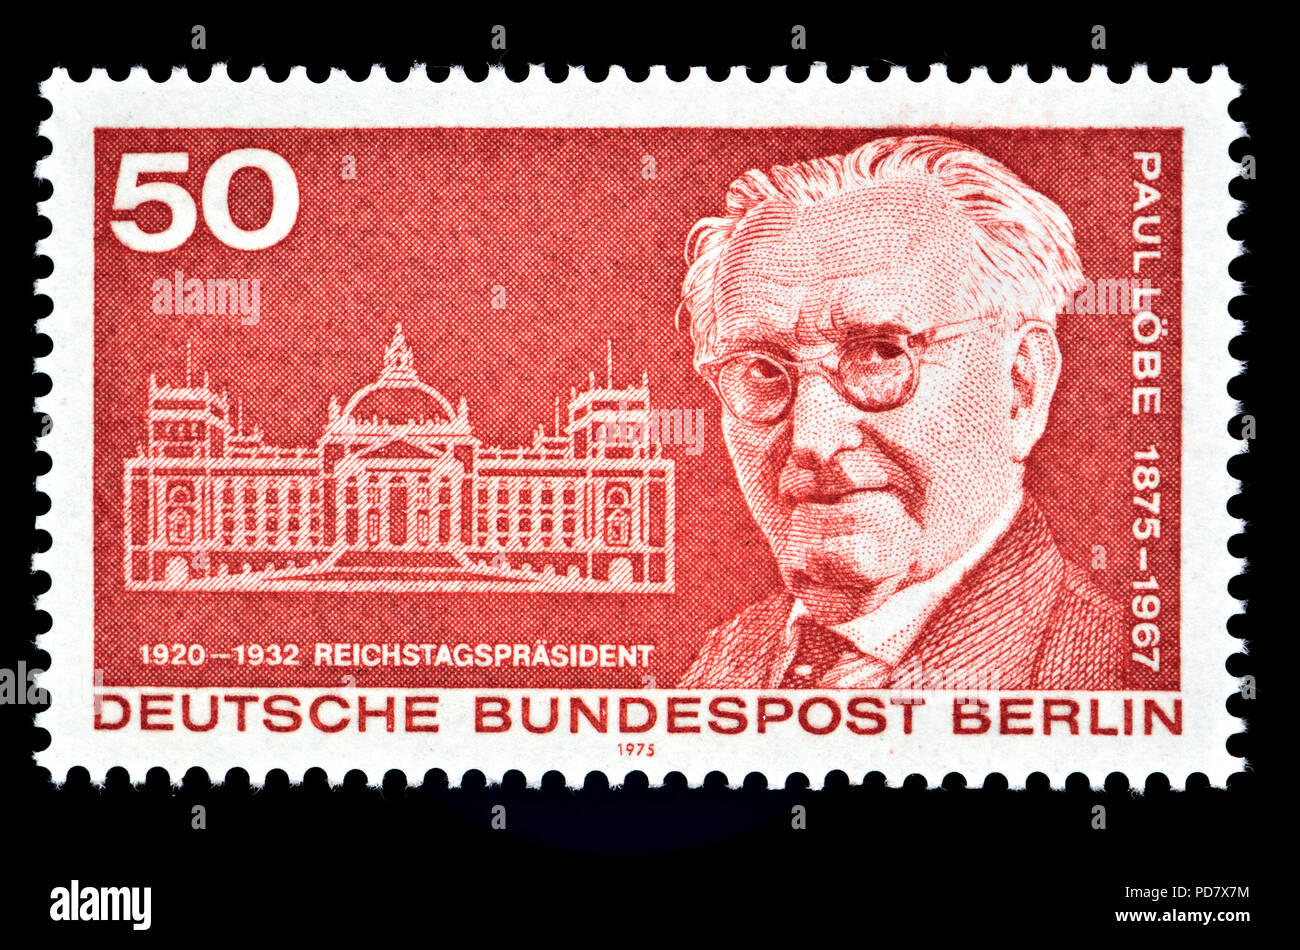 German postage stamp (Berlin: 1920) : Paul Löbe (1875 –1967) German politician and member of the Social Democratic Party of Germany (SPD) Reichstag Pr Stock Photo